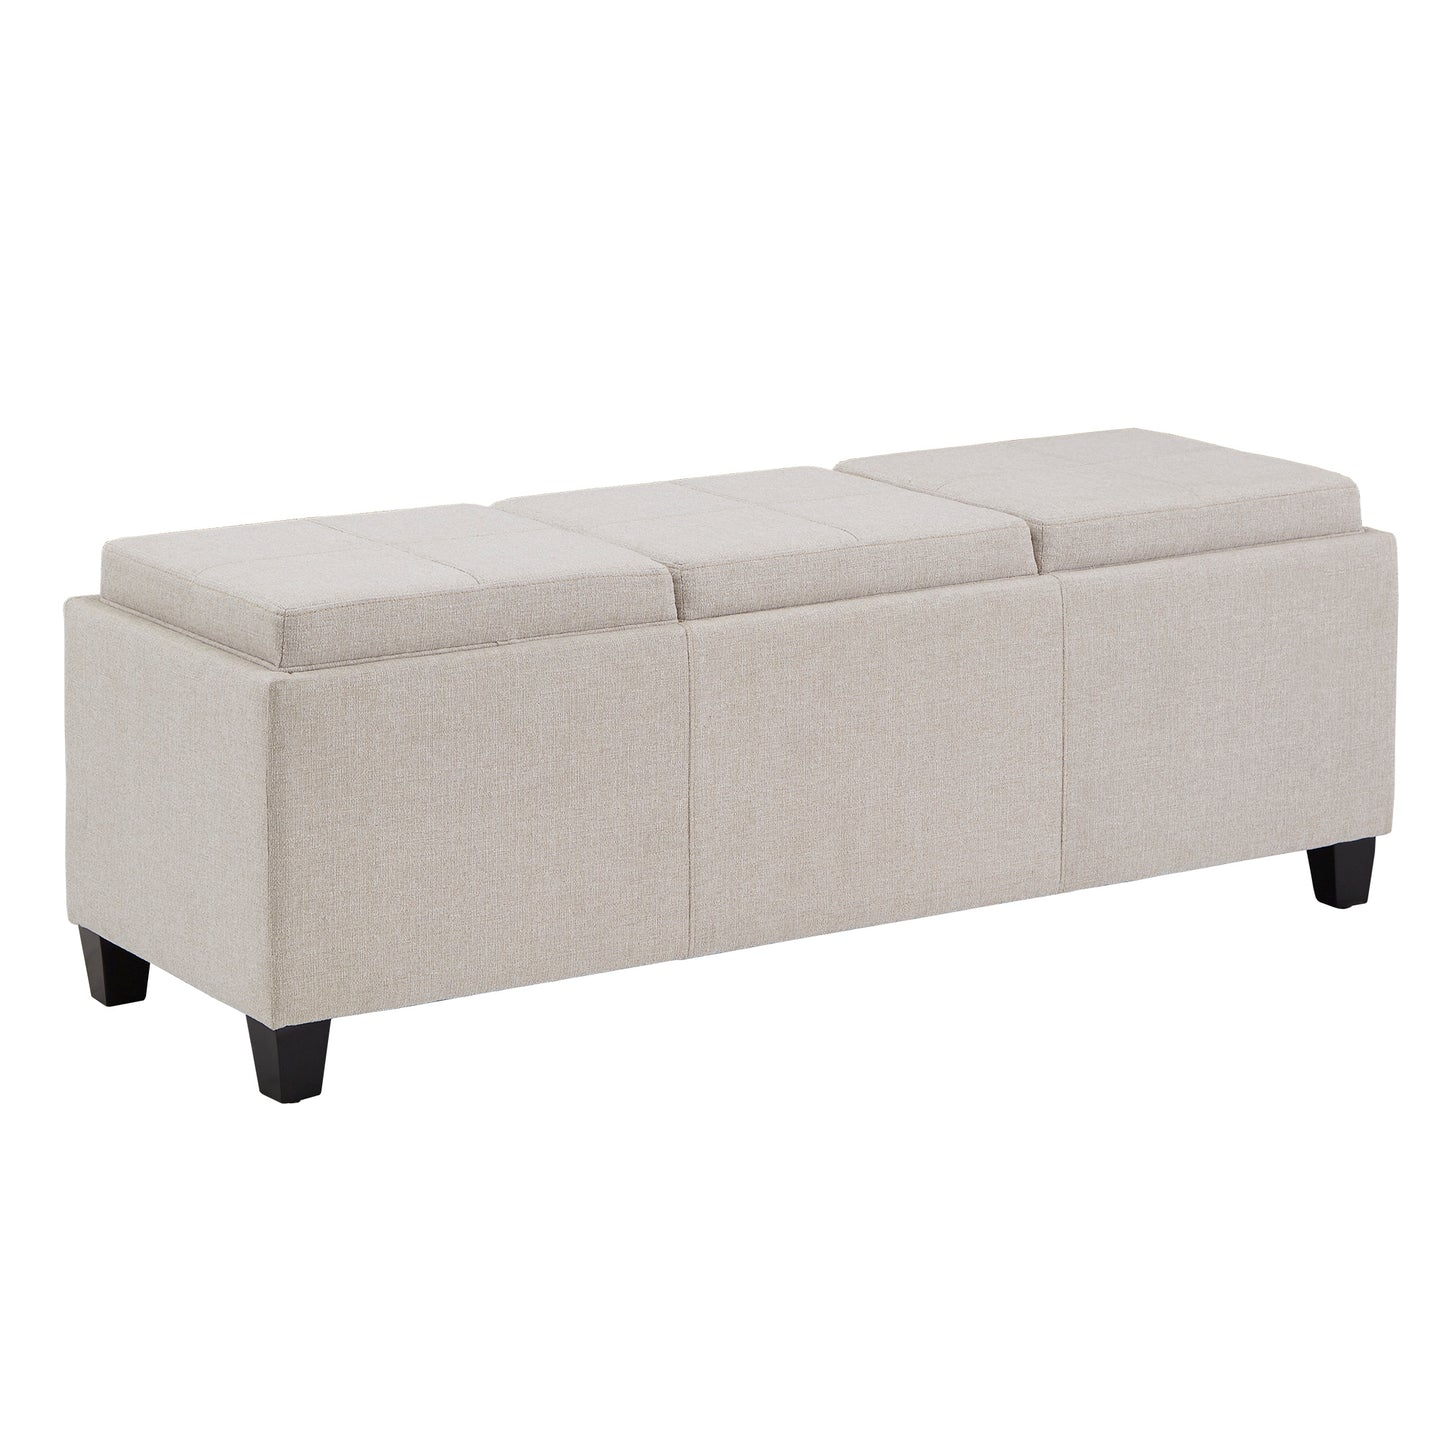 Heathered Weave Storage Bench with Trays